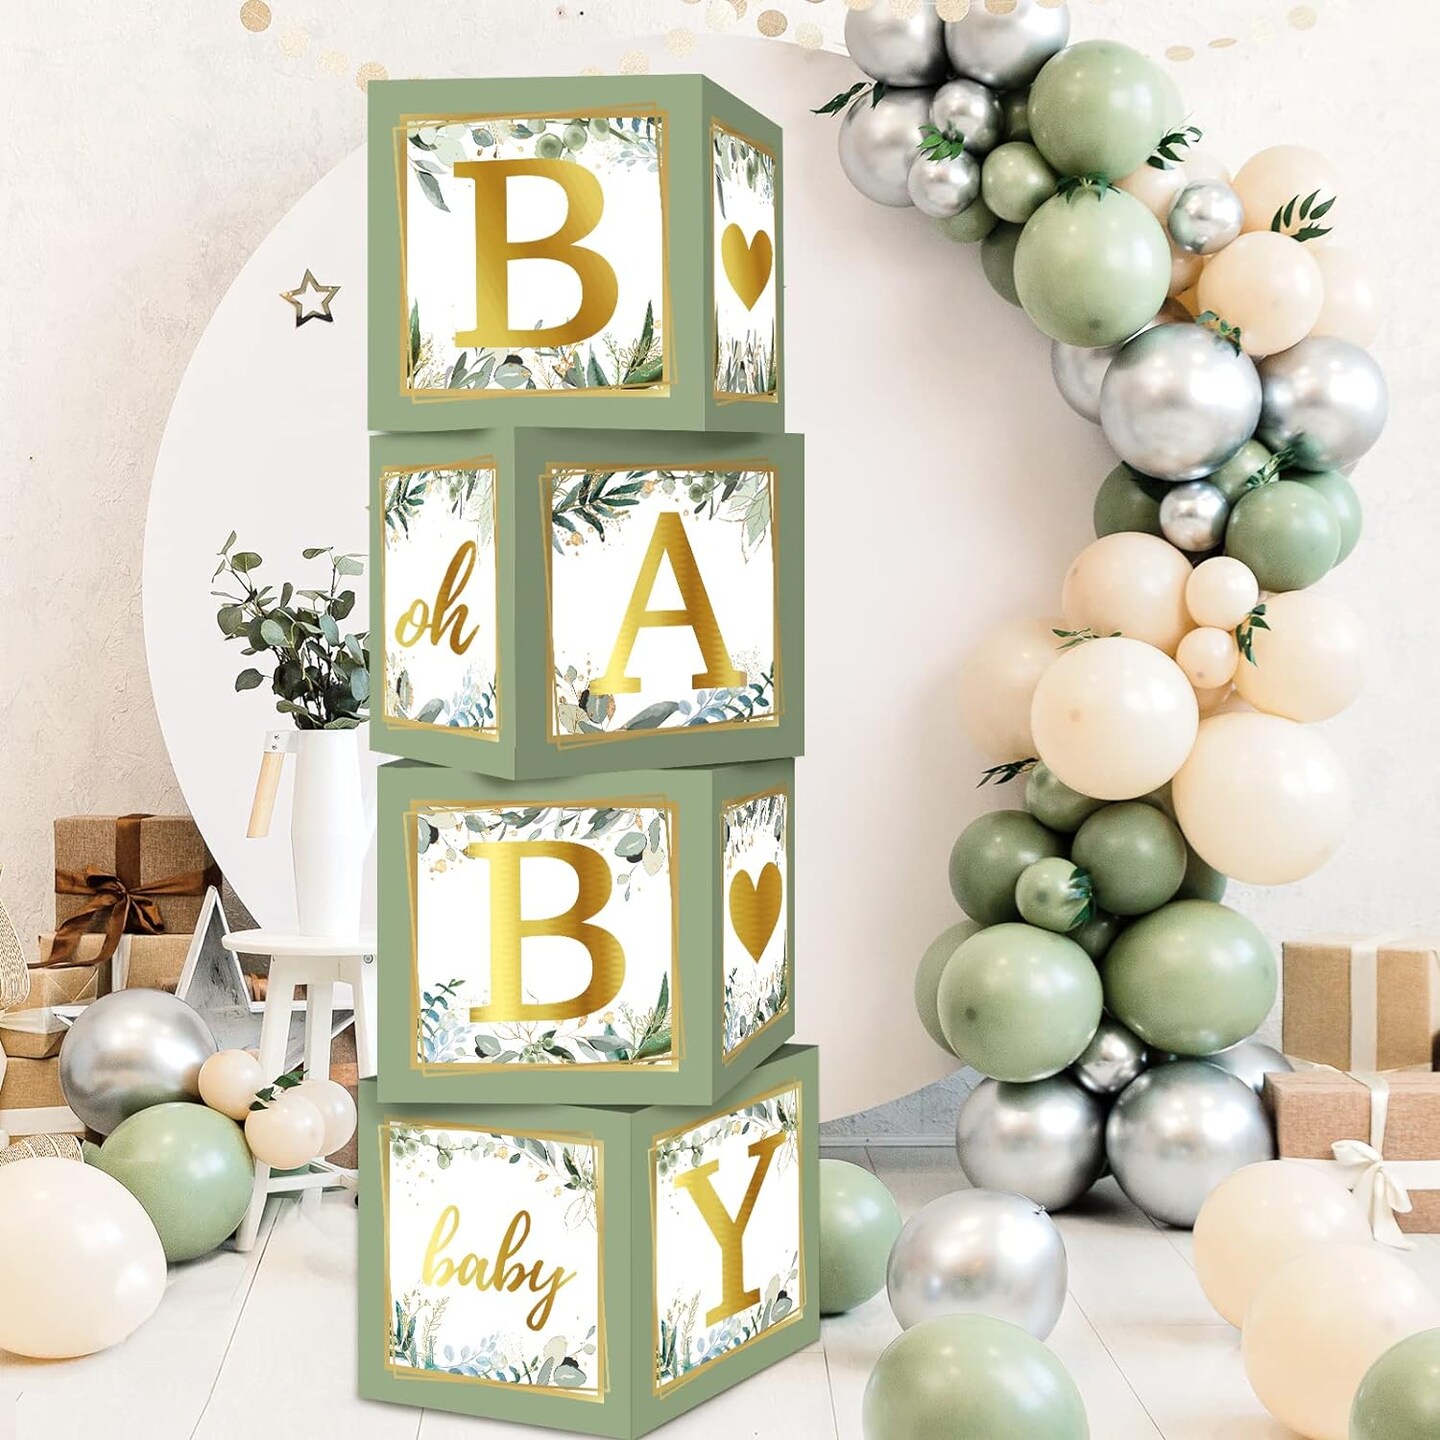 Sage Green Baby Boxes with Letters for Baby Shower, 4pcs Safari Baby Shower Decorations for Boy Girl Balloon Boxes Gender Reveal Baby Shower Birthday Party Favors